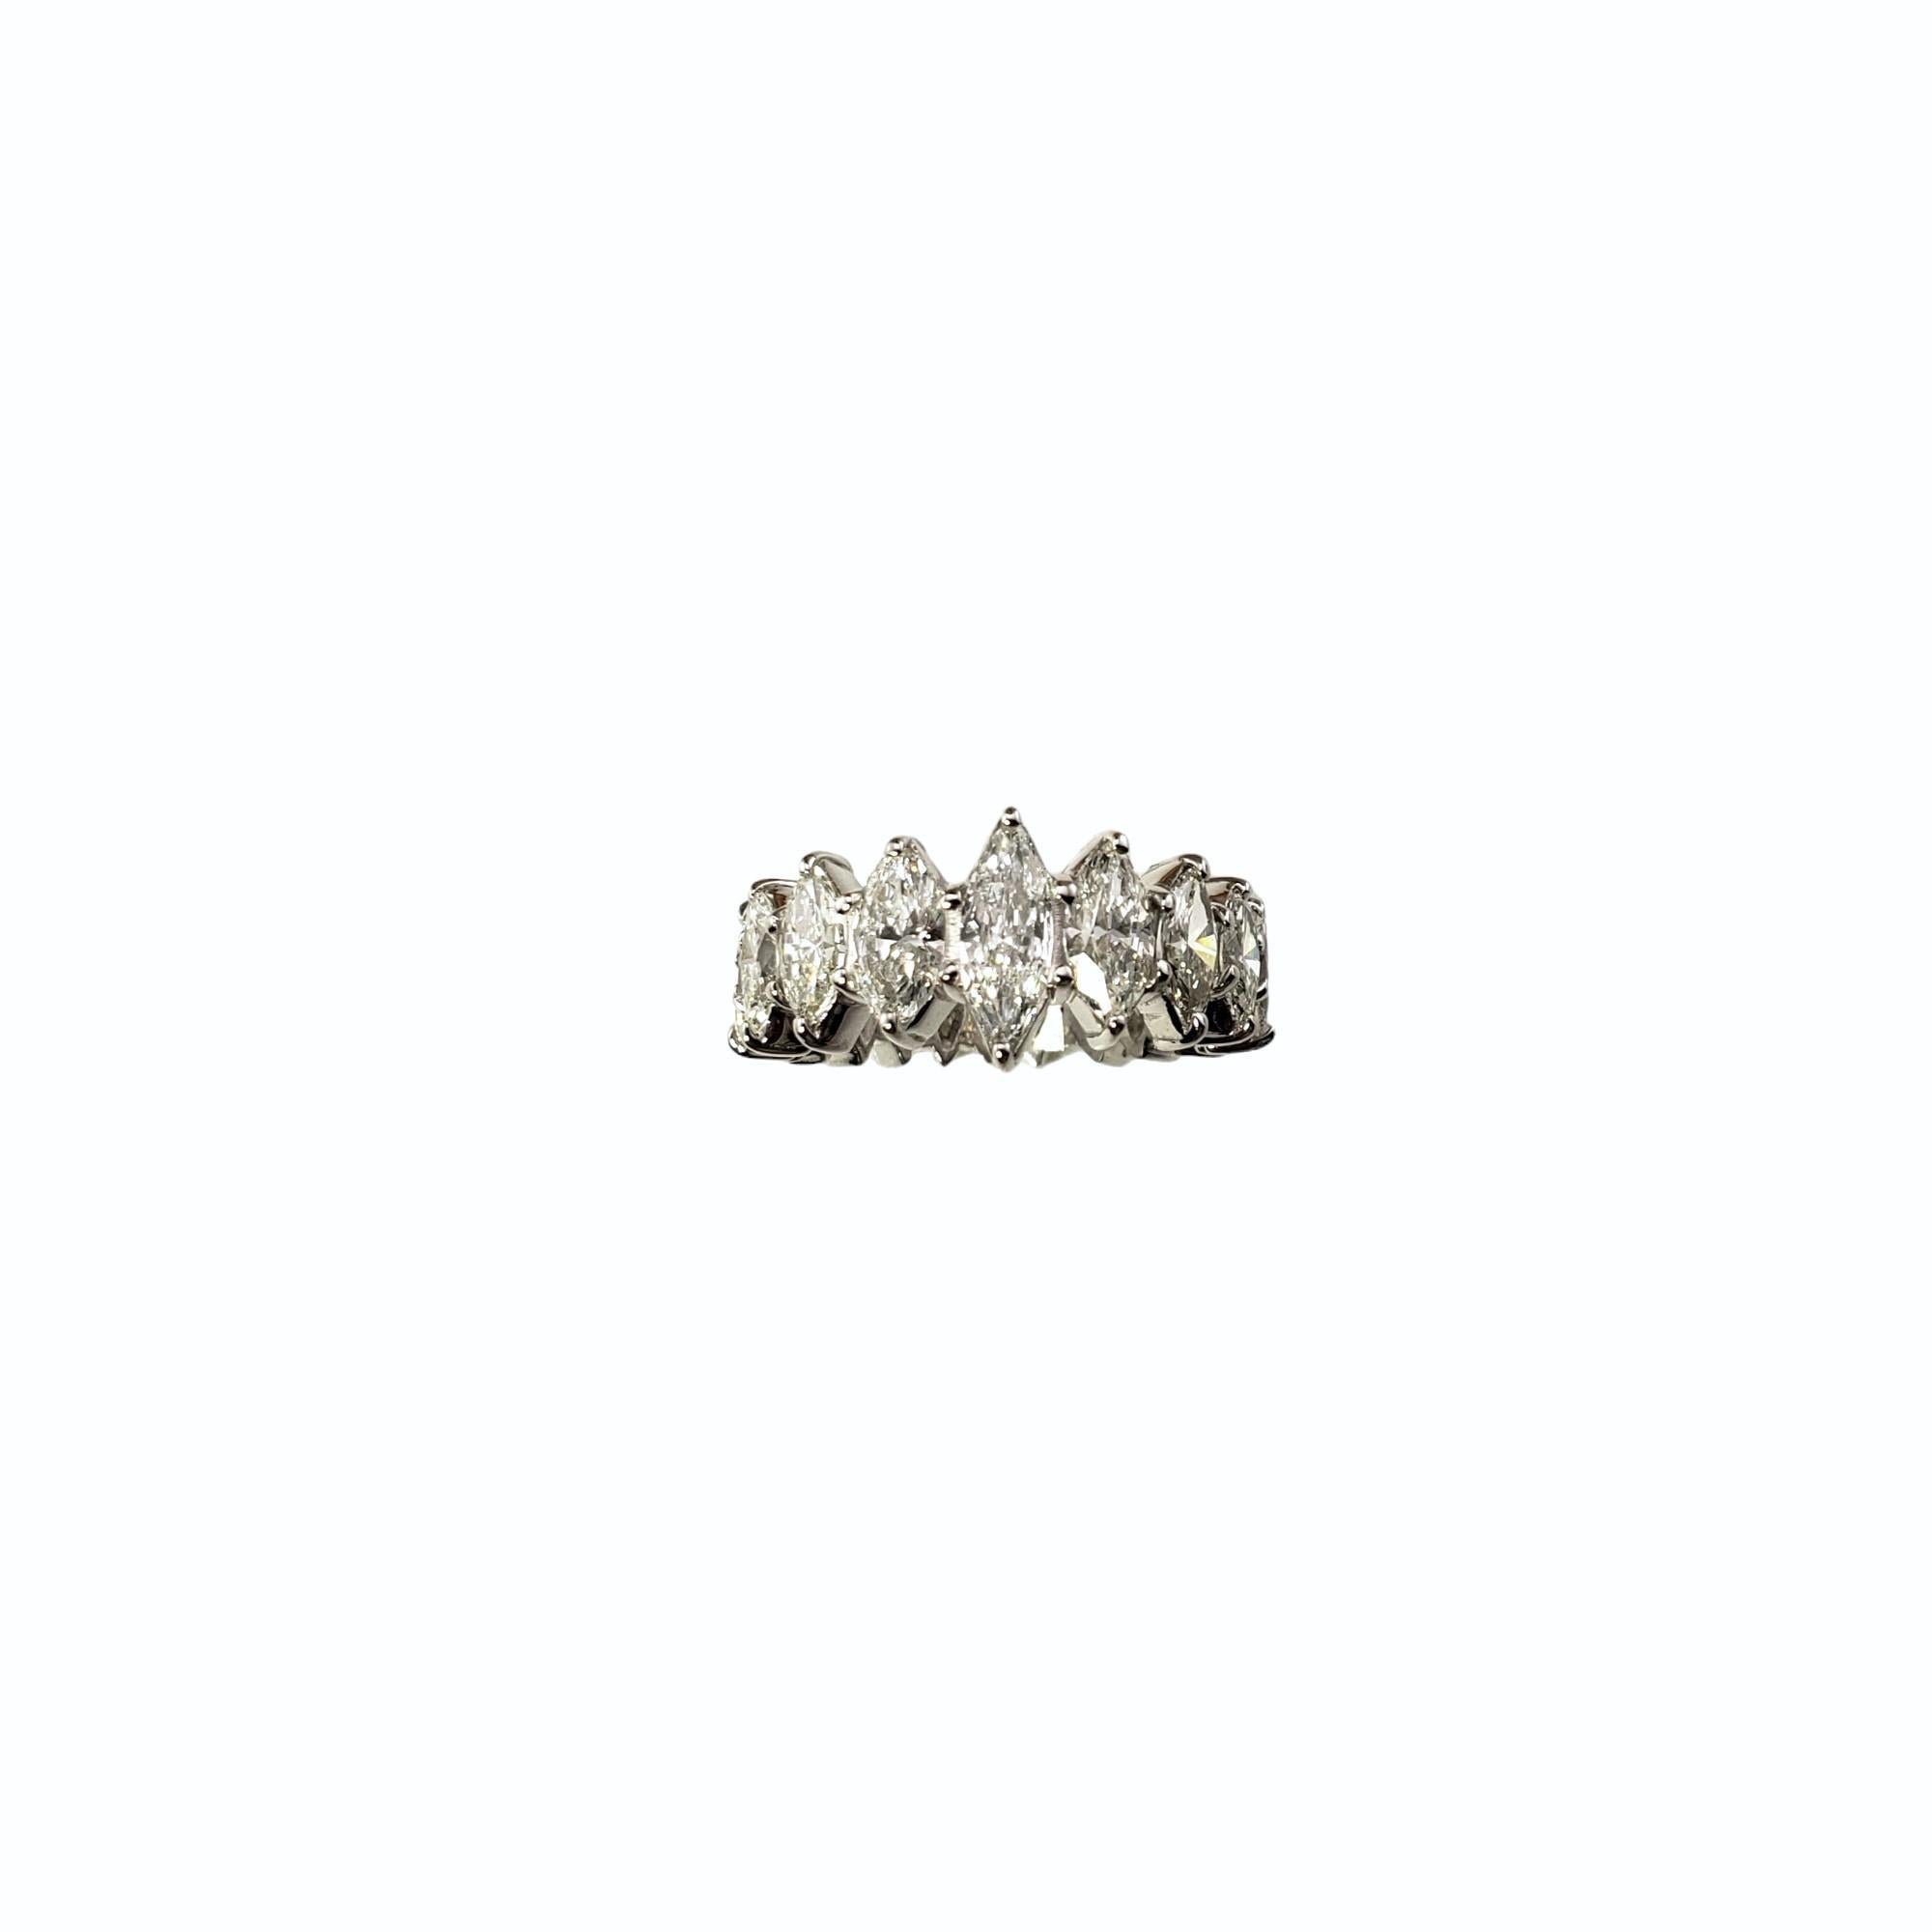 Vintage Platinum Marquise Diamond Eternity Band Ring Size 5 JAGi Certified-

This sparkling eternity band features 20 marquise cut diamonds (center: .29 ct.) set in classic platinum.  Width:  10 mm.  

Total diamond weight: 2.95 ct.

Diamond